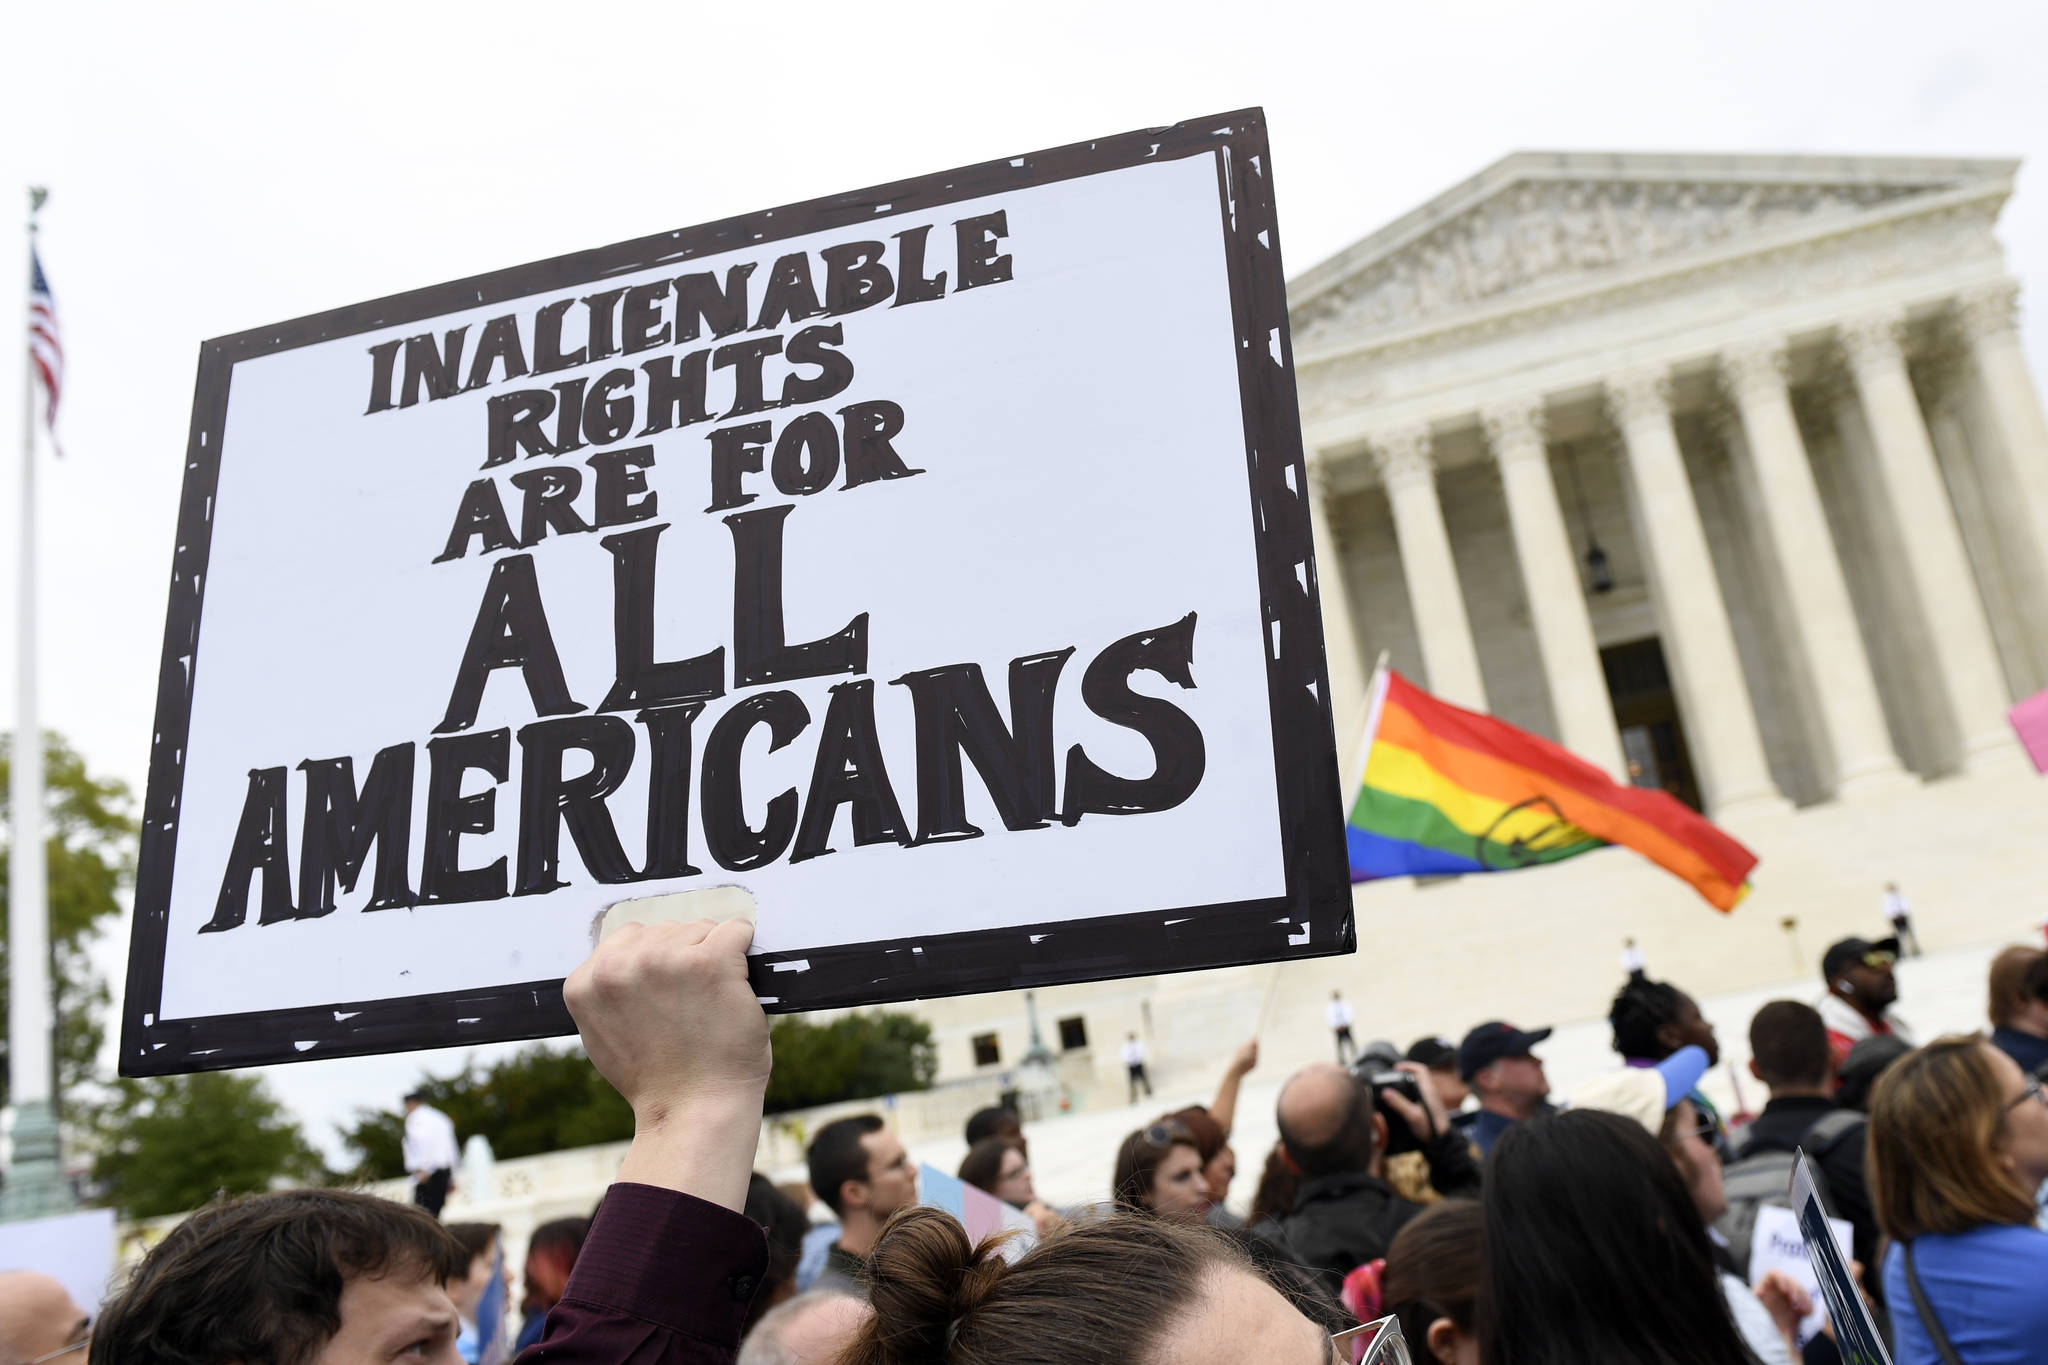 In this Oct. 8, 2019, file photo, protesters gather outside the Supreme Court in Washington where the Supreme Court is hearing arguments in the first case of LGBT rights since the retirement of Supreme Court Justice Anthony Kennedy. As vice president in 2012, Joe Biden endeared himself to many LGBTQ Americans by endorsing same-sex marriage even before his boss, President Barack Obama. Now, as president-elect, Biden is making sweeping promises to LGBTQ activists, proposing to carry out virtually every major proposal on their wish lists. (AP Photo/Susan Walsh, File)